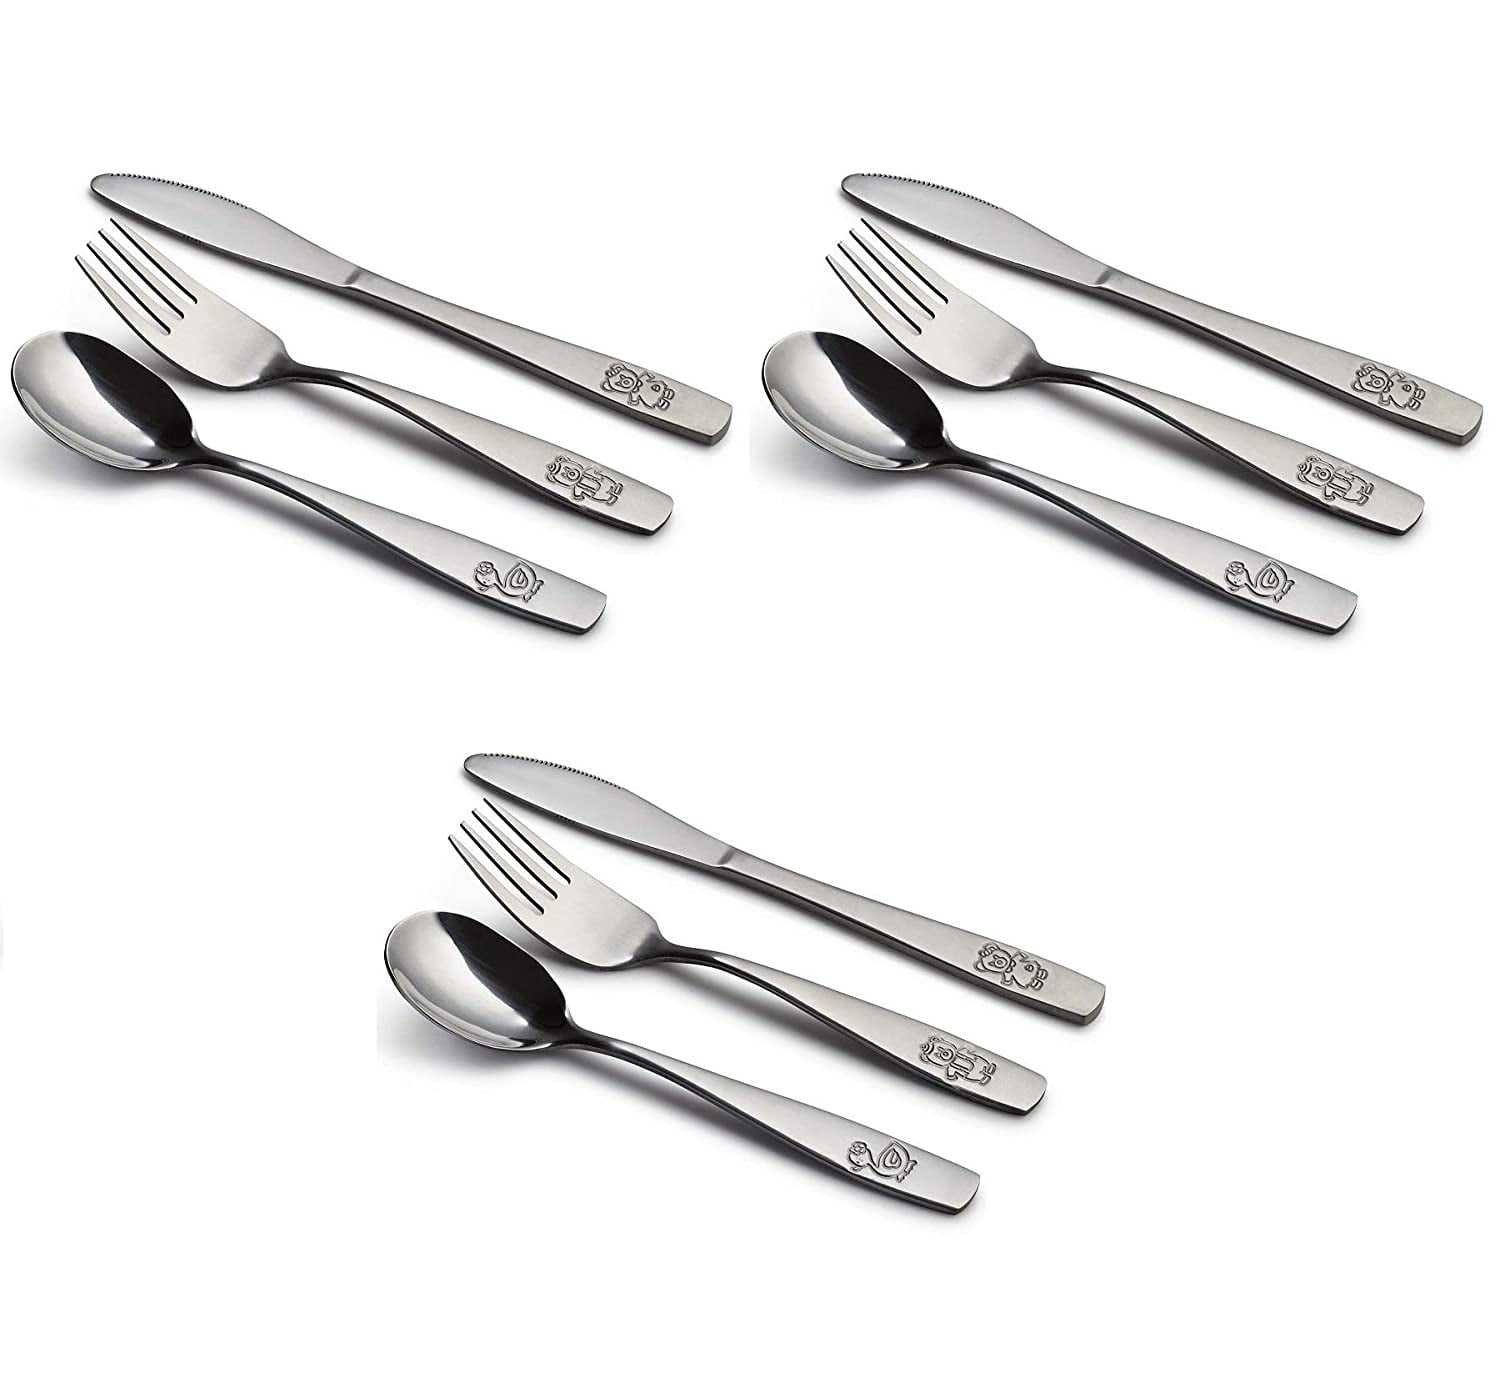 Includes 3 Knives Ideal for Home and Primary Schools 9 Piece Stainless Steel Childrens Cutlery Child and Toddler Safe Flatware Kids Cutlery Set 3 Forks Kids Silverware 3 Spoons 